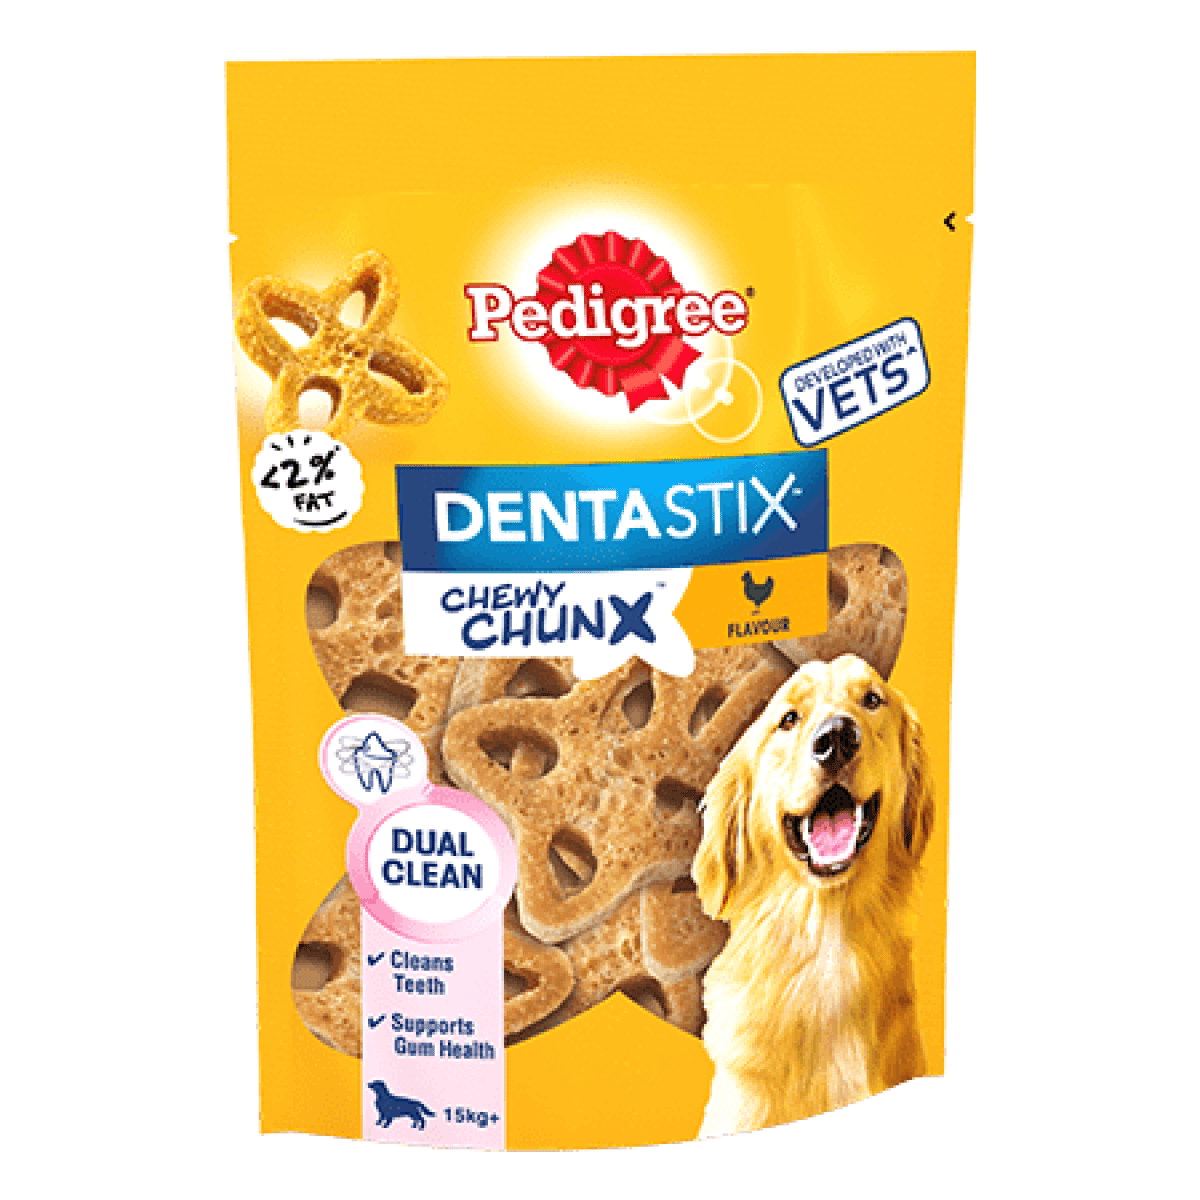 Pedigree Dentastix Chewy Chunx Maxi- Chicken 68g – Pawfect Supplies Ltd Product Image